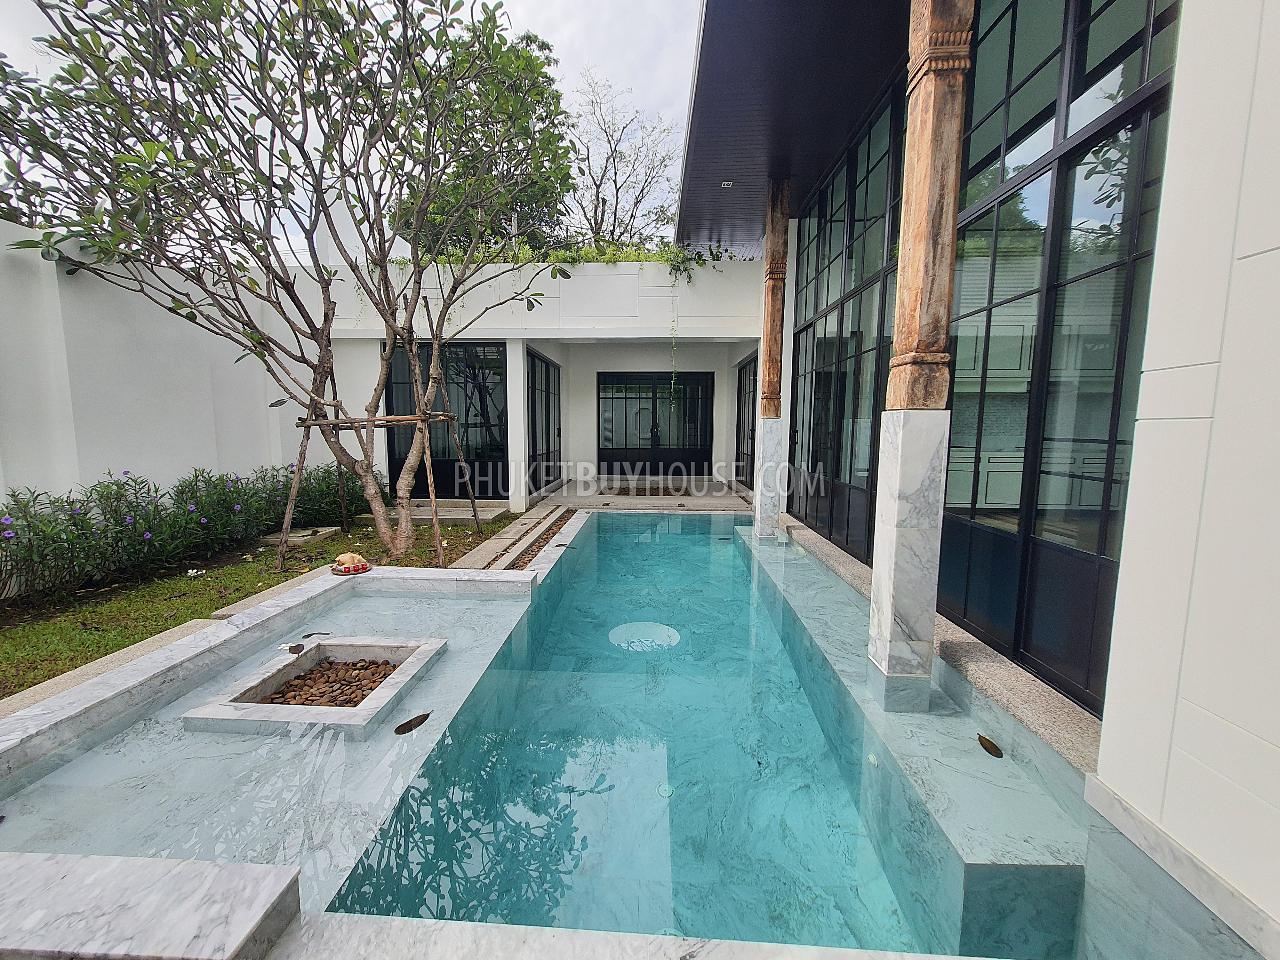 BAN6282: New Villa with 3 Bedrooms and Private Pool in a Convenient Area near Bang Tao. Photo #40